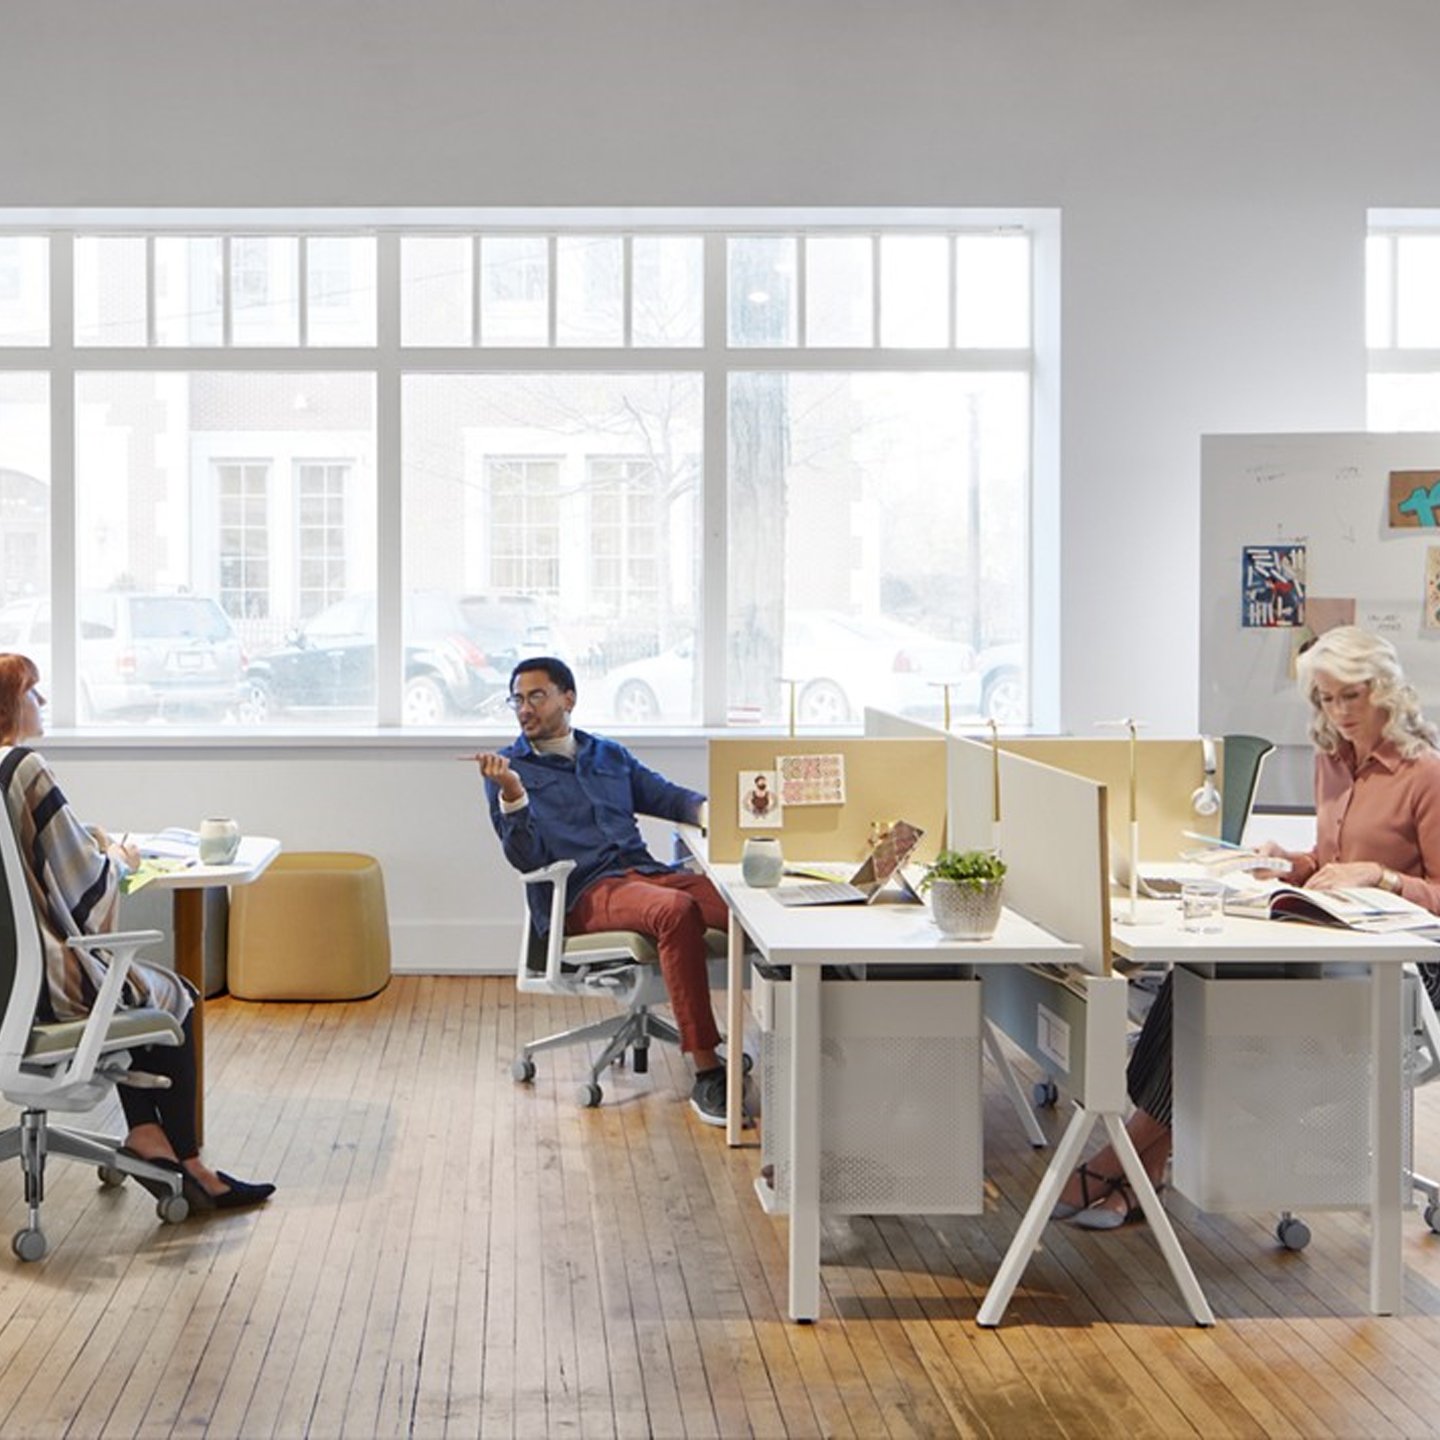 Haworth Compose Beam Workspace Divider in office space with employees working at desks and talking